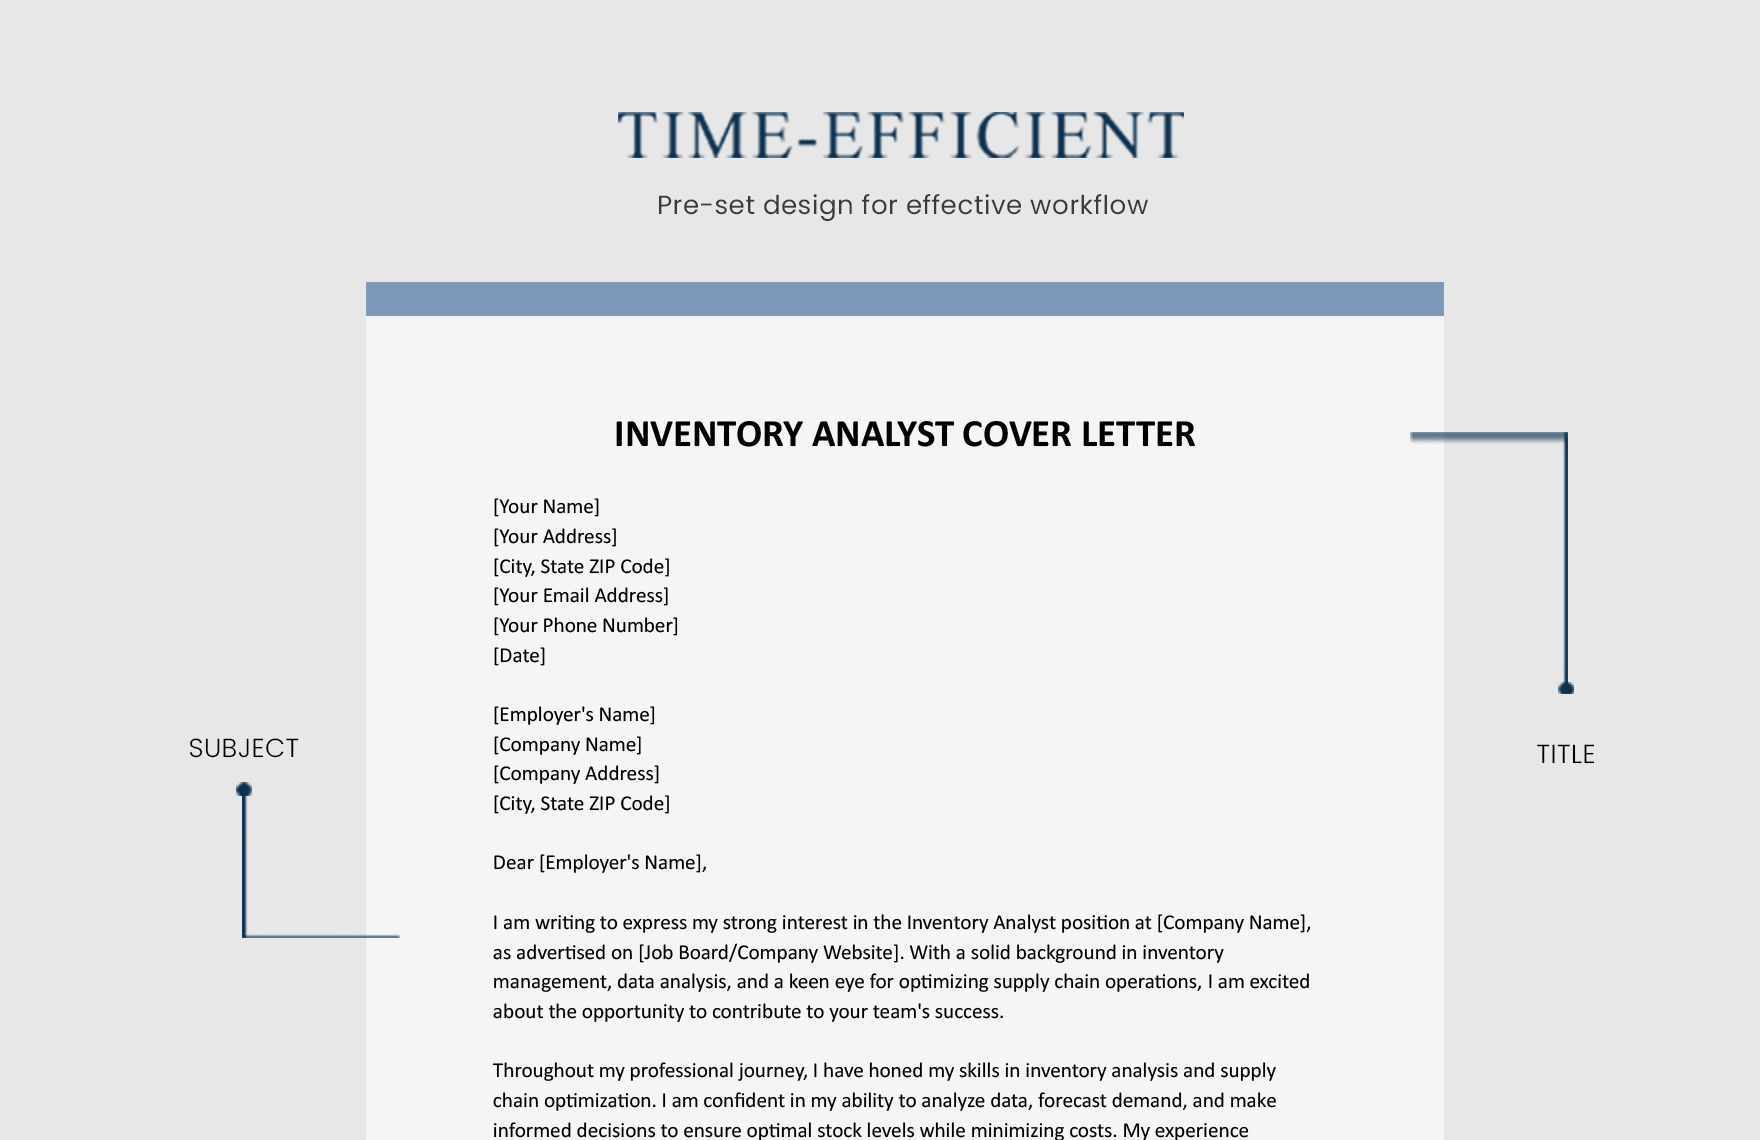 Inventory Analyst Cover Letter